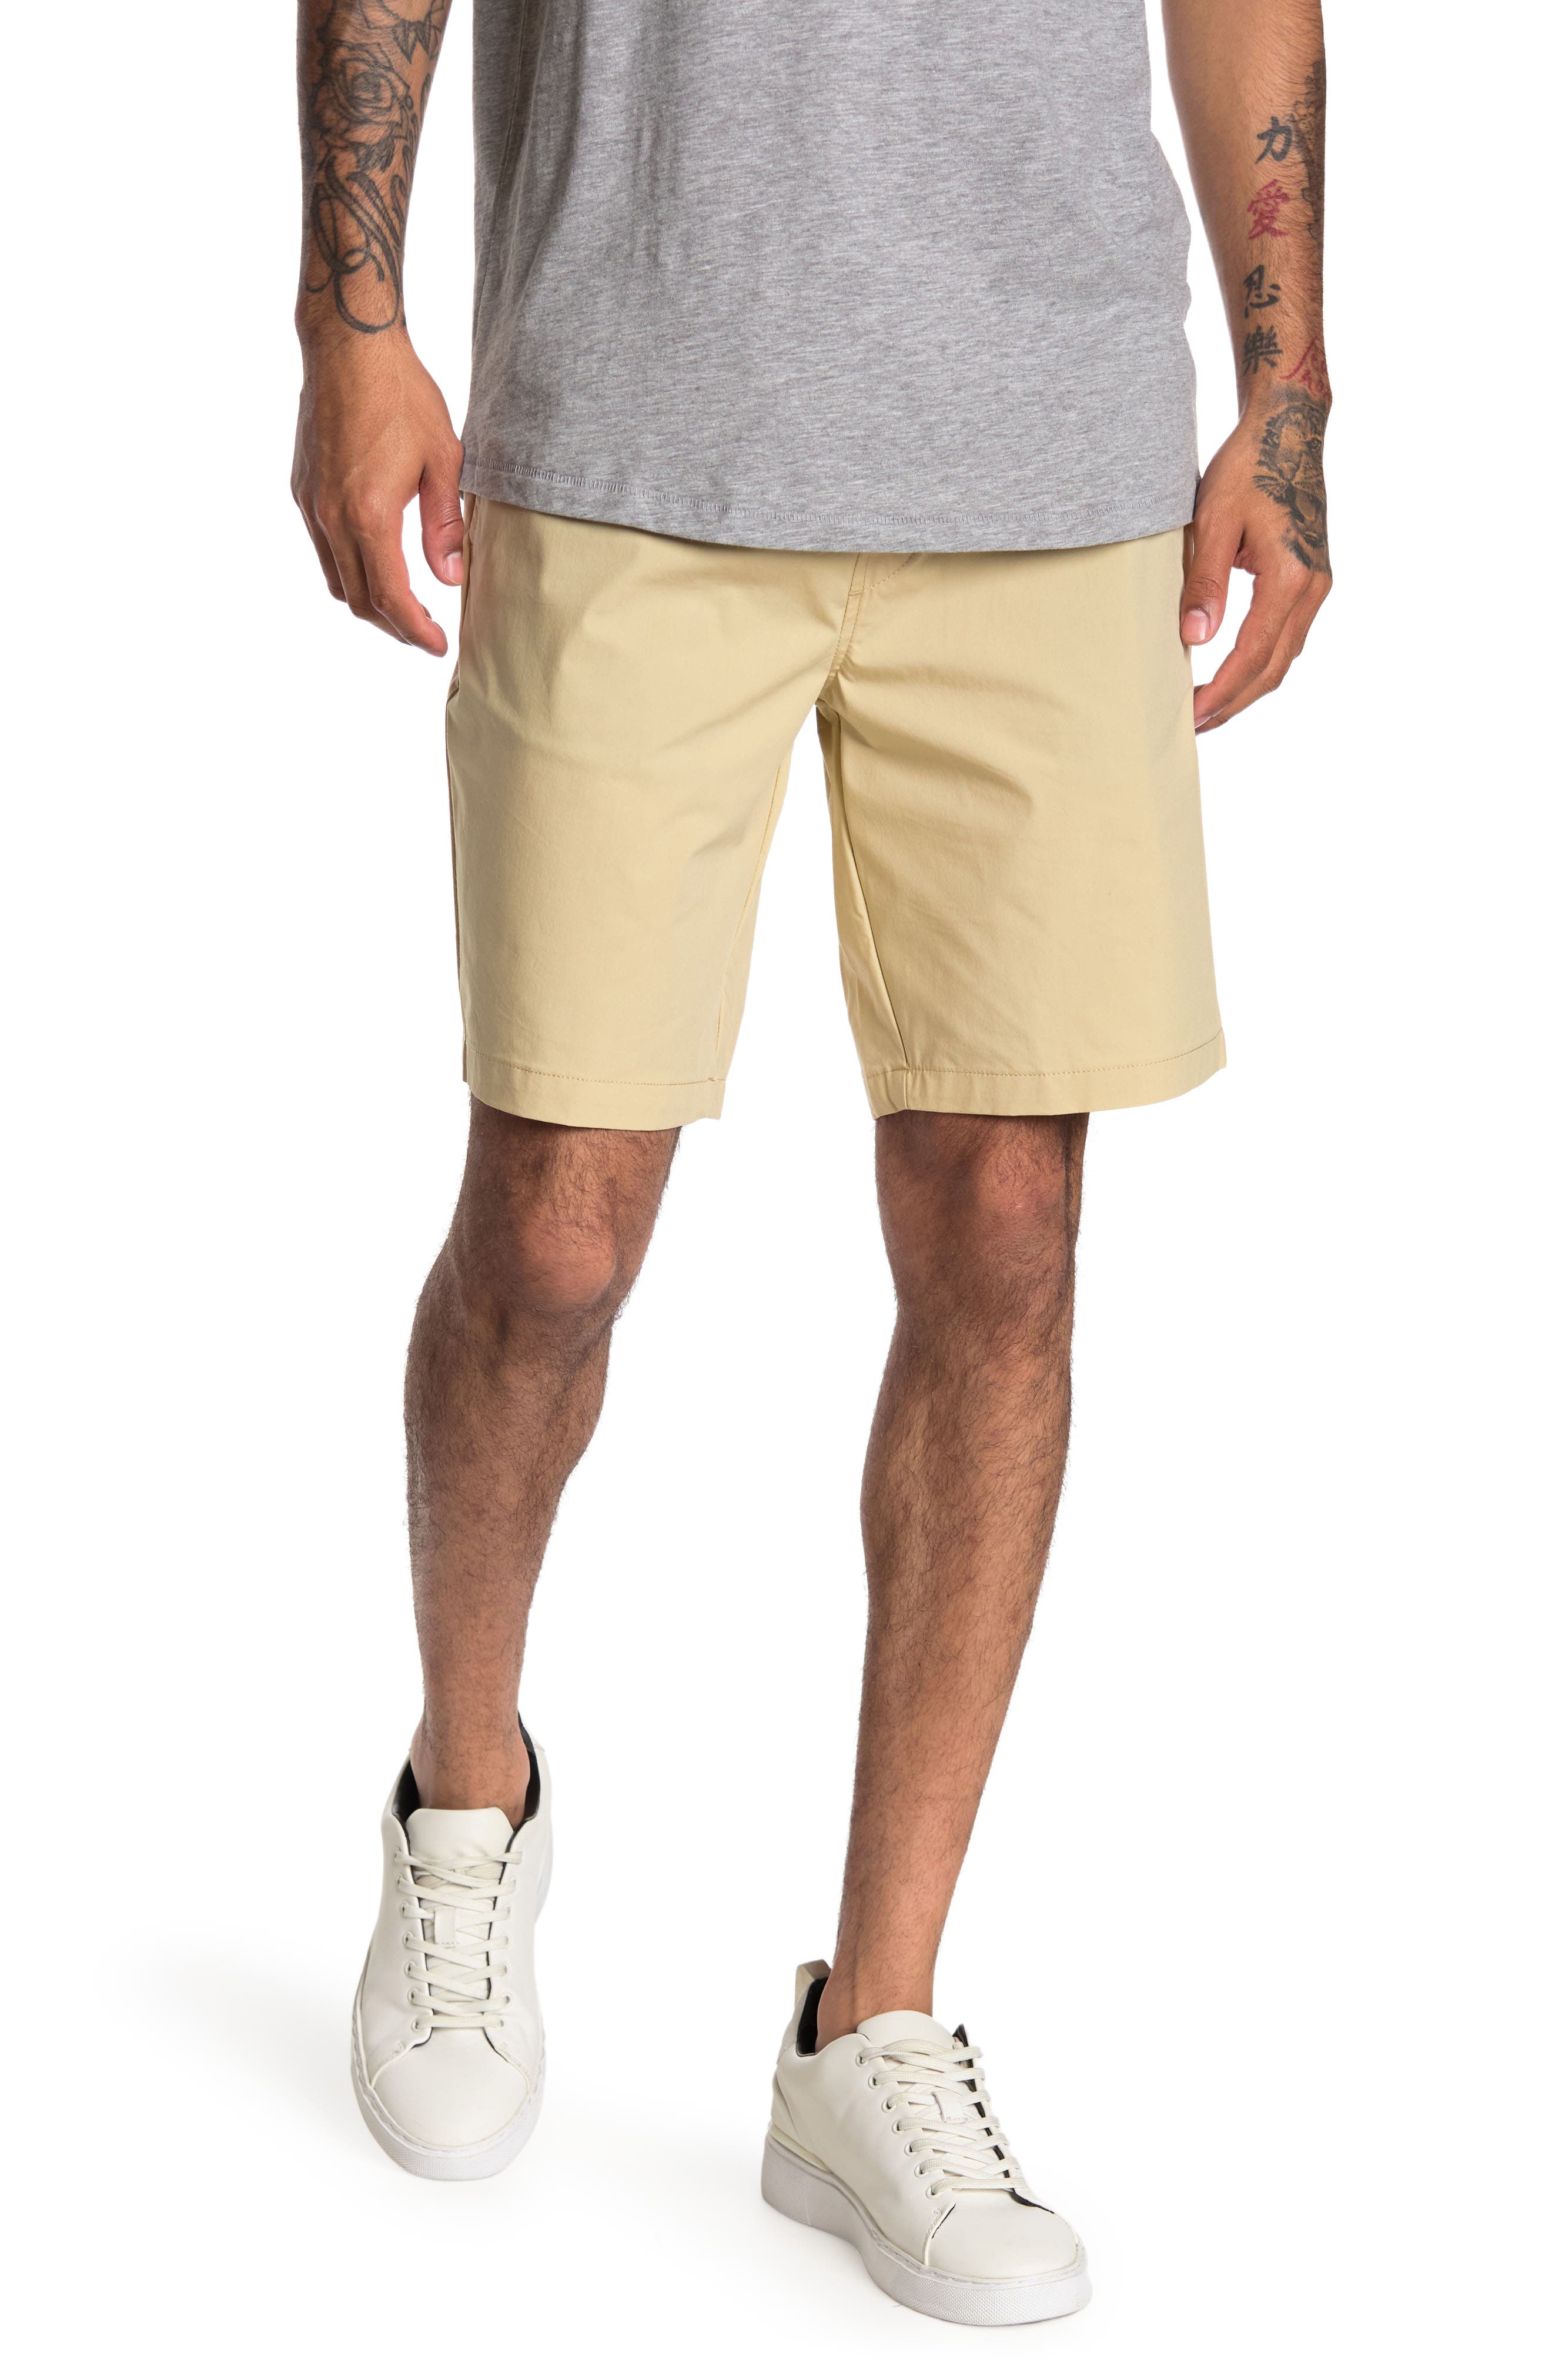 SELECTED HOMME BRADY FLEX DRAWCORD SHORTS,5715093973142